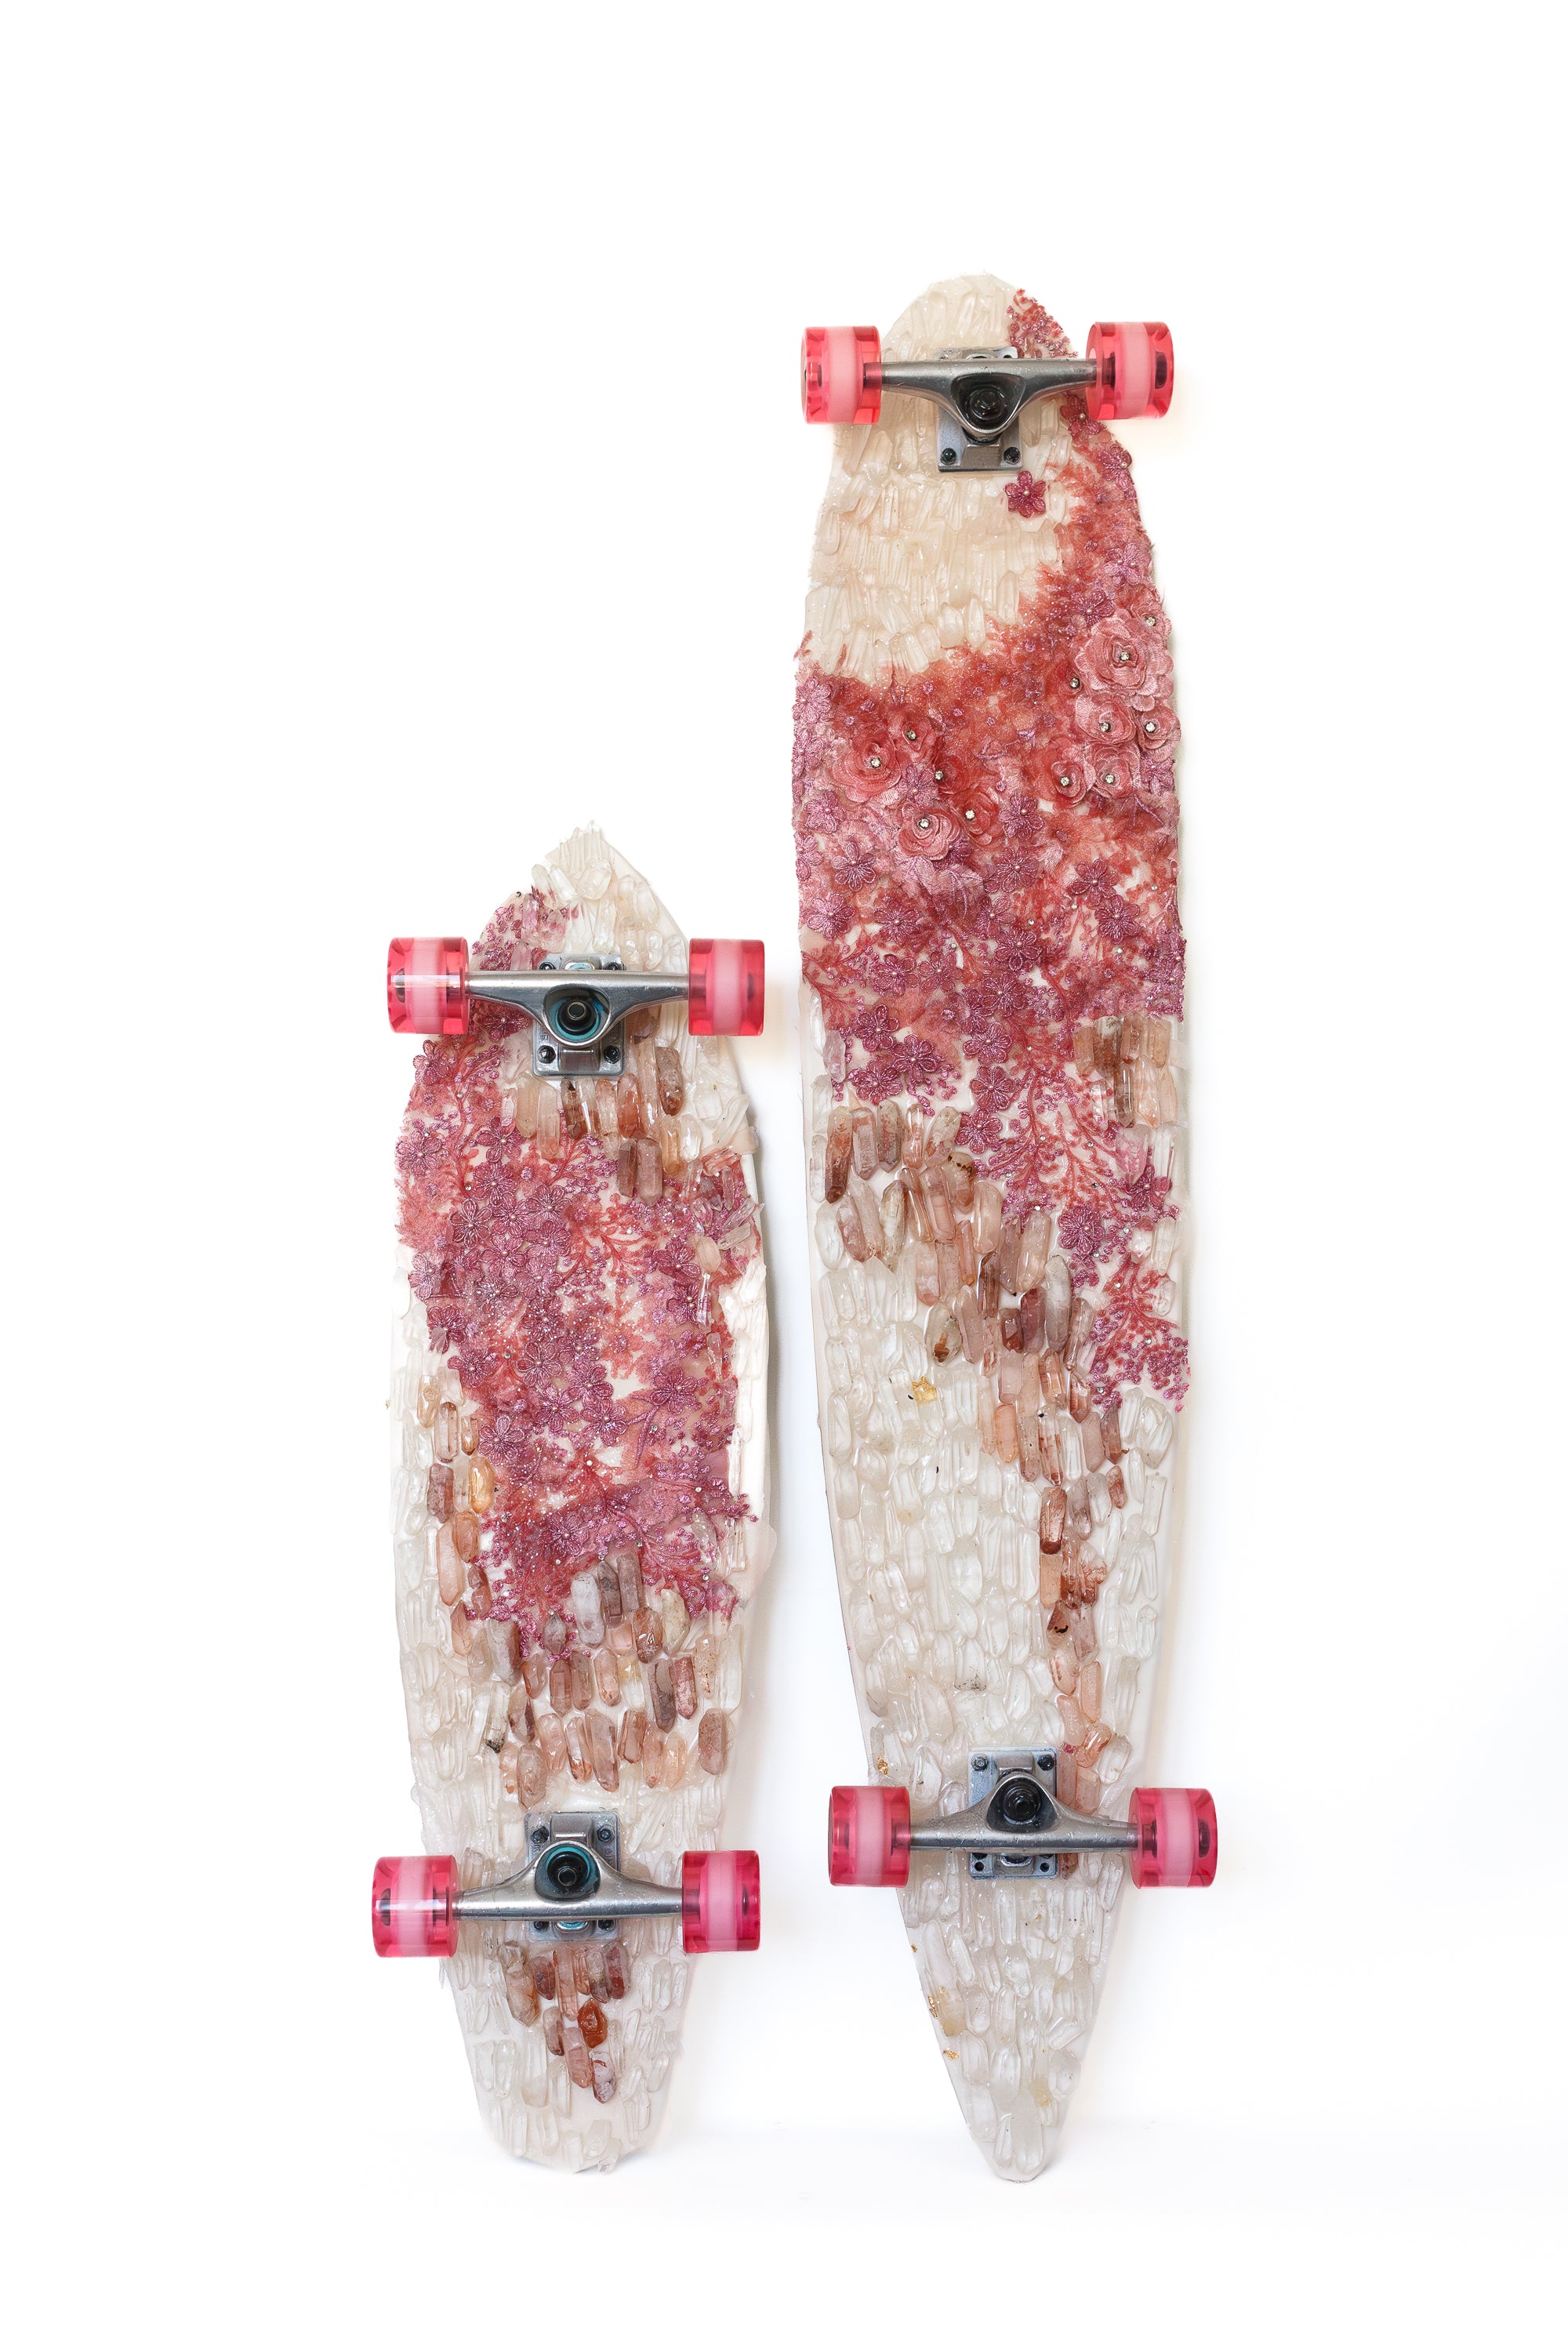 Fine art Collection - skateboard - " Mermaid Dream" set of Two